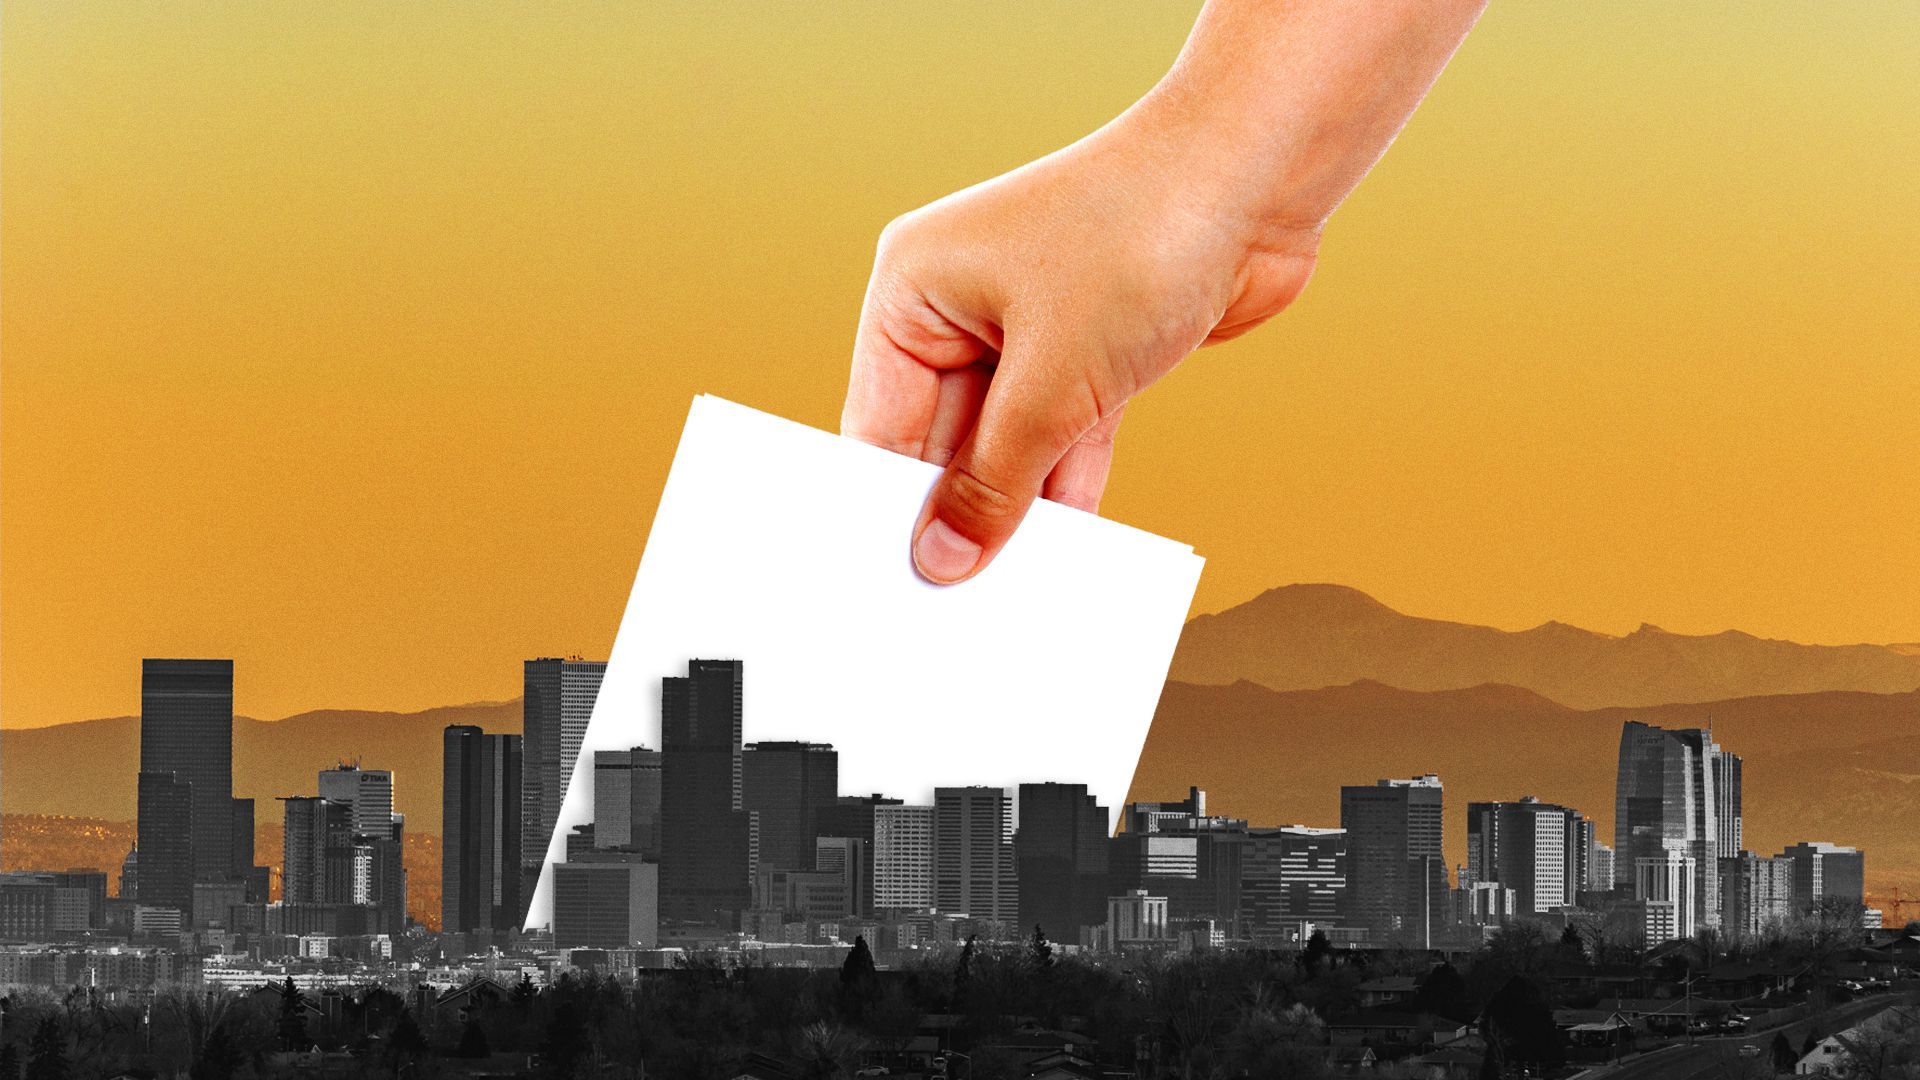 A ballot being dropped into the Denver skyline.